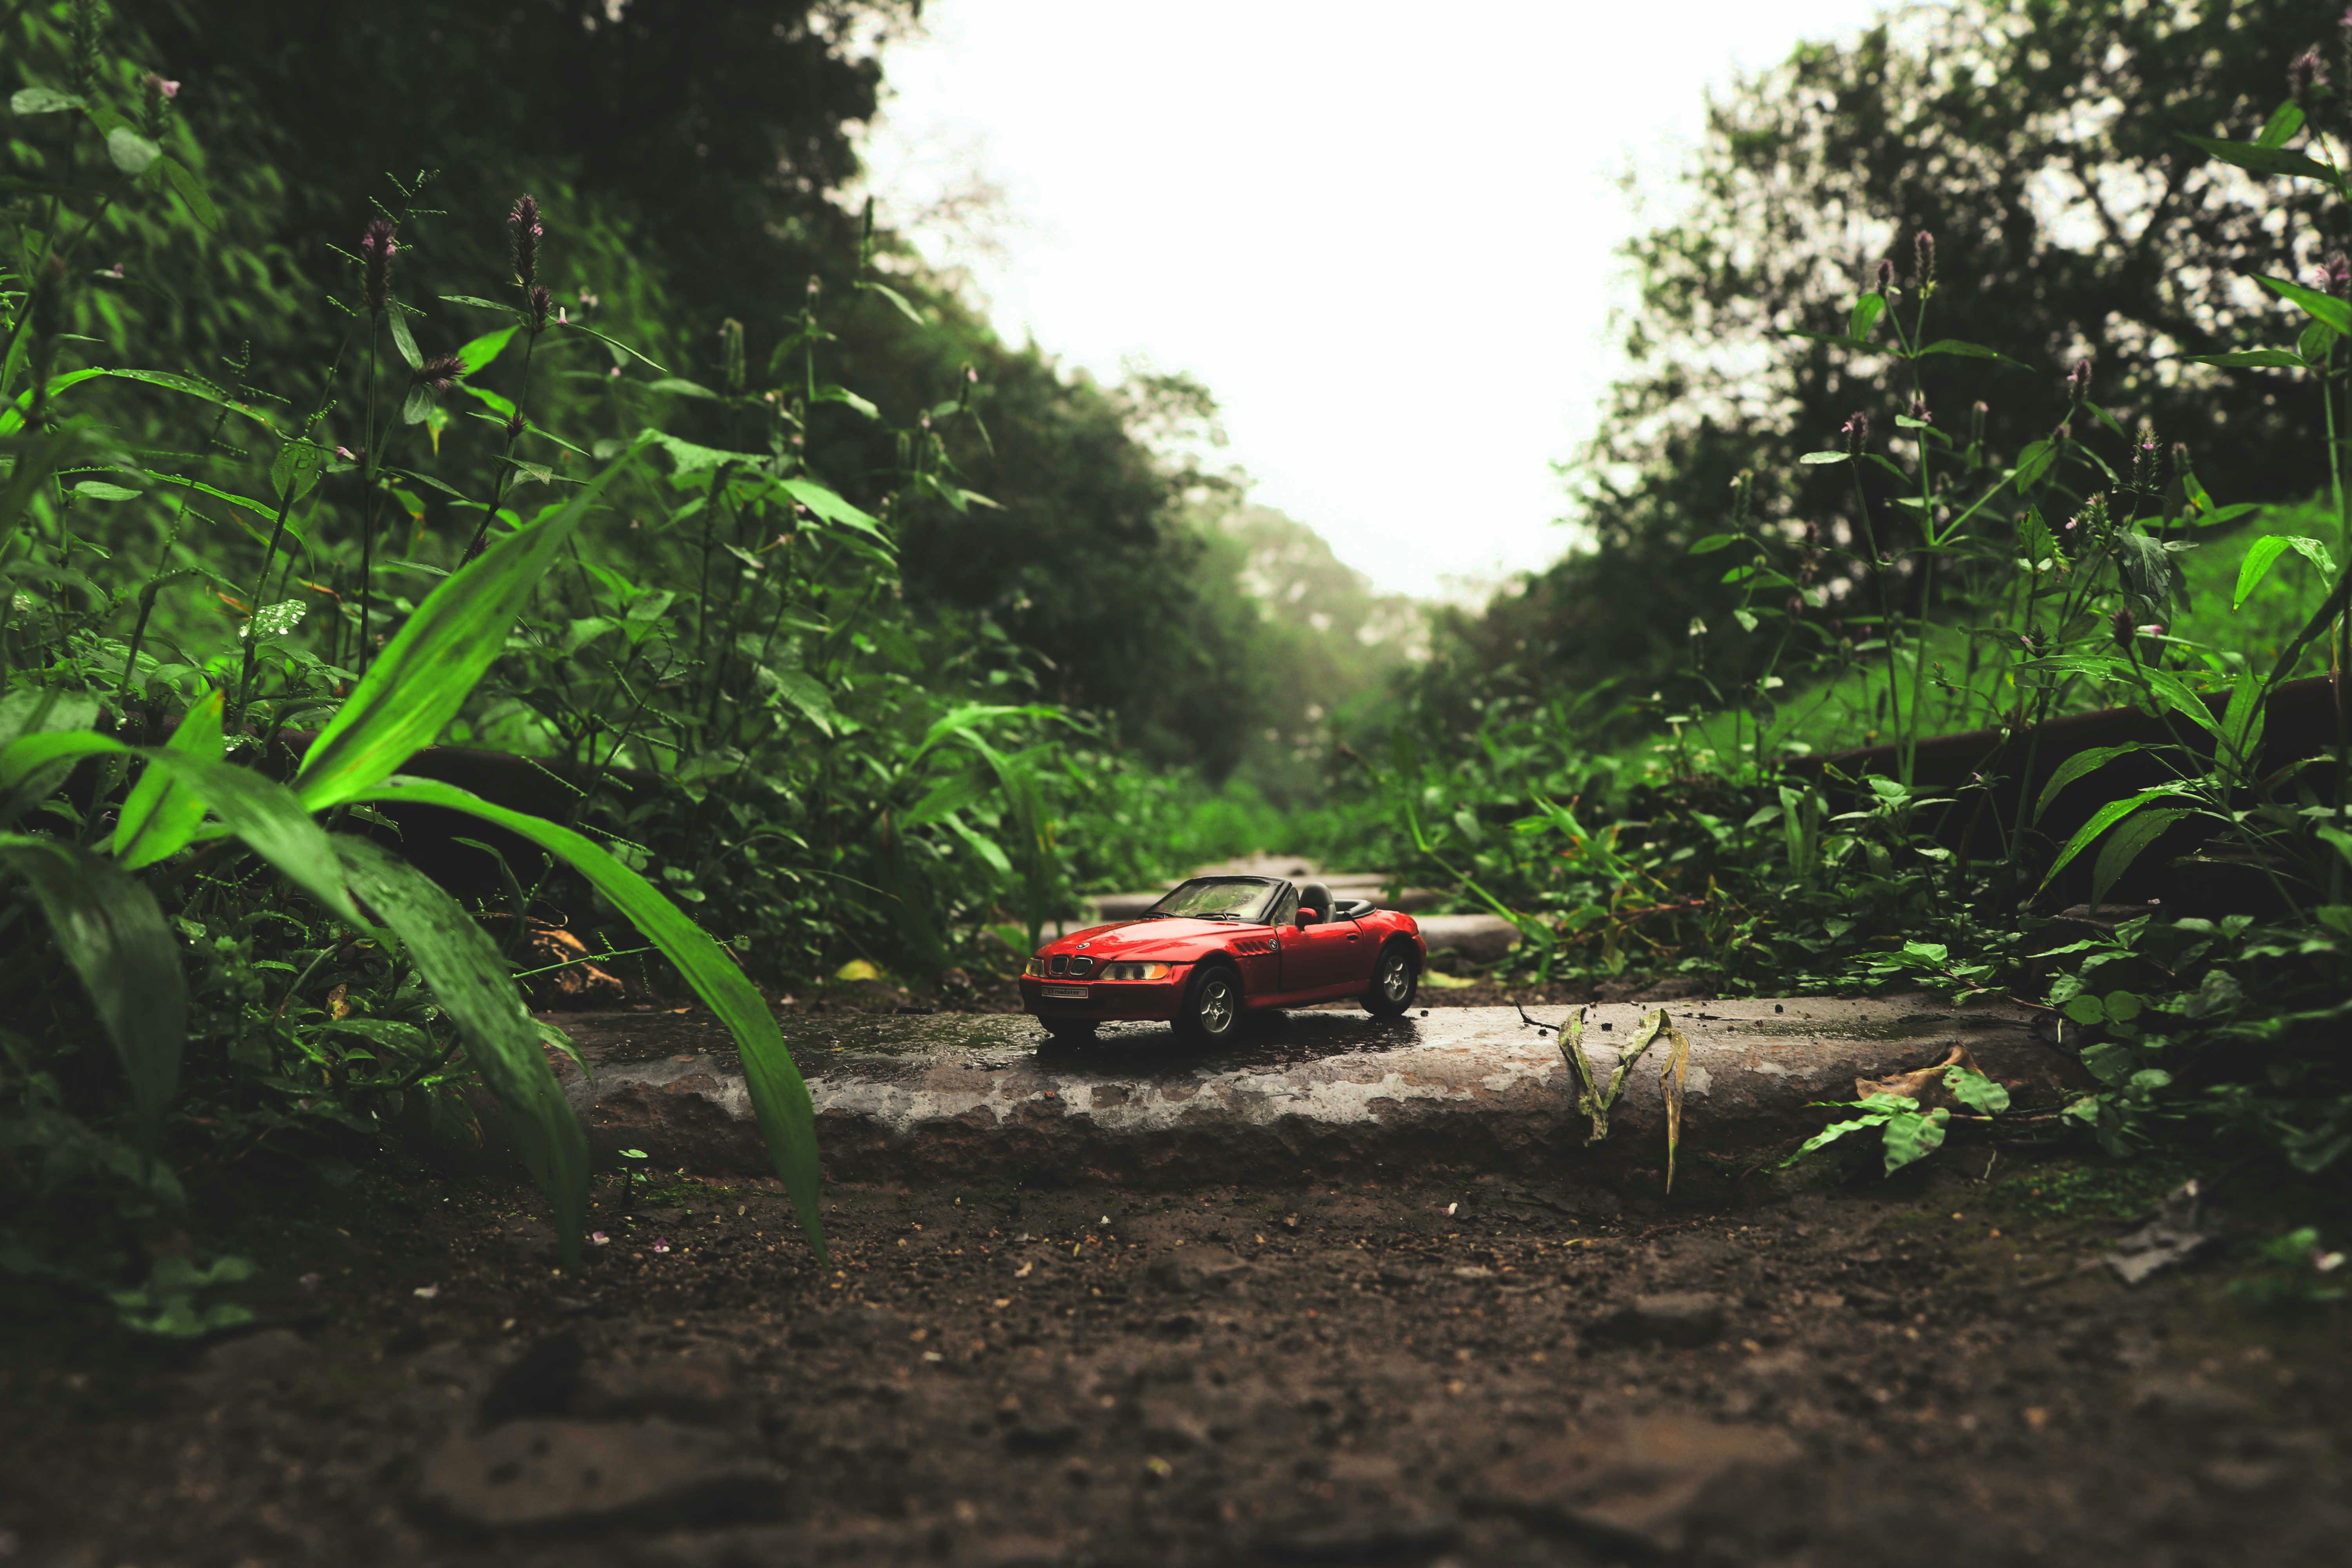 Toy car exploring offroad.